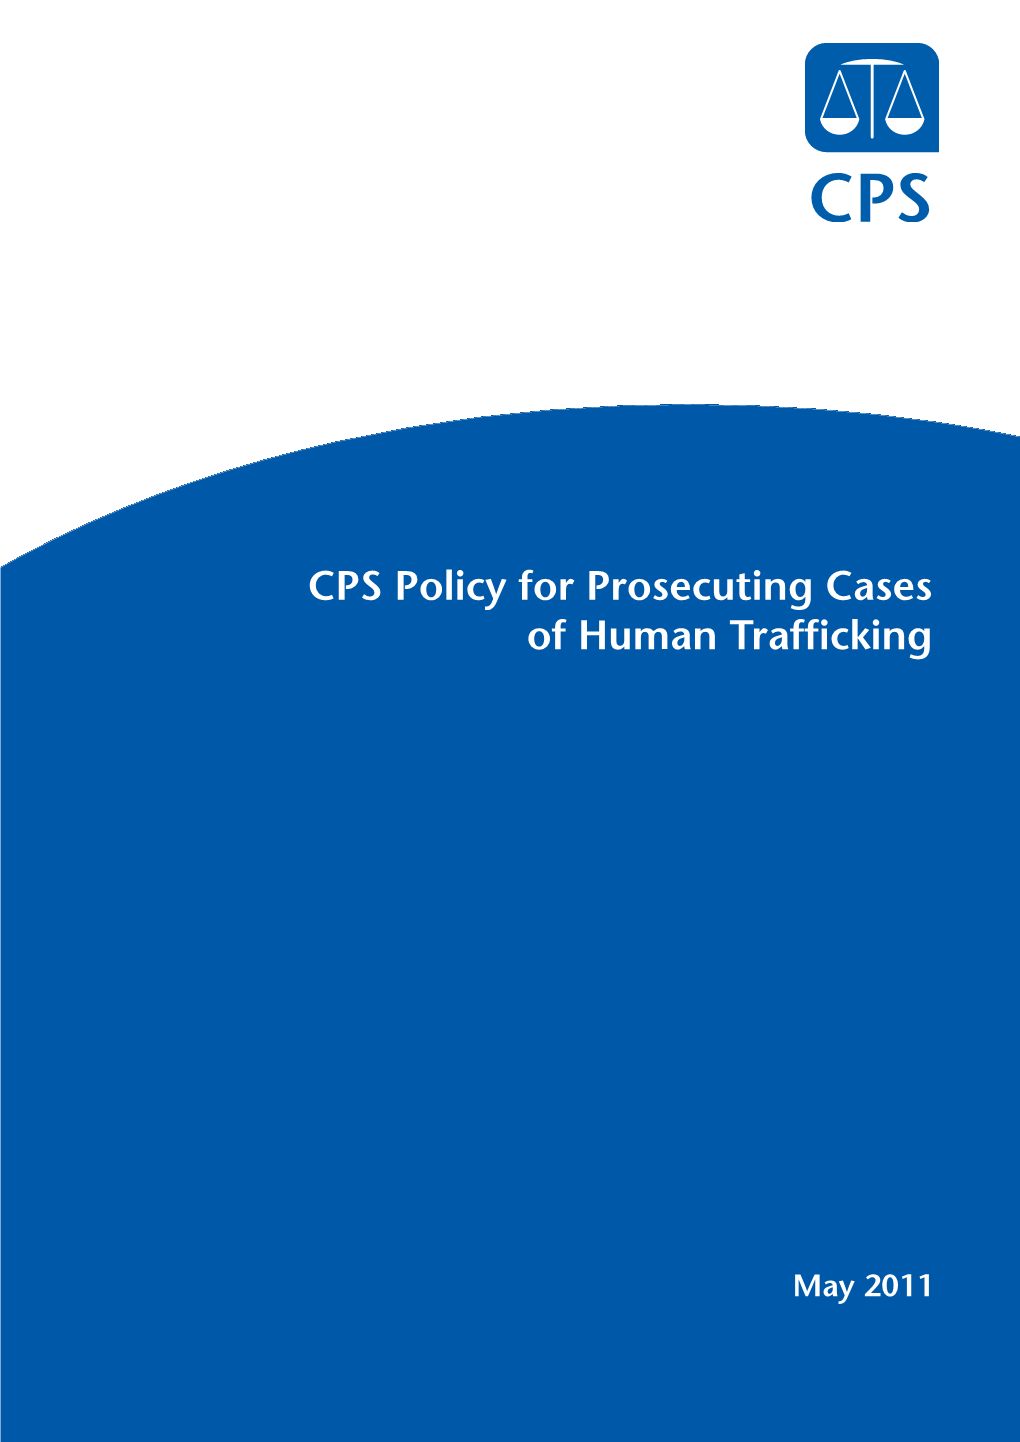 CPS Policy for Prosecuting Cases of Human Trafficking